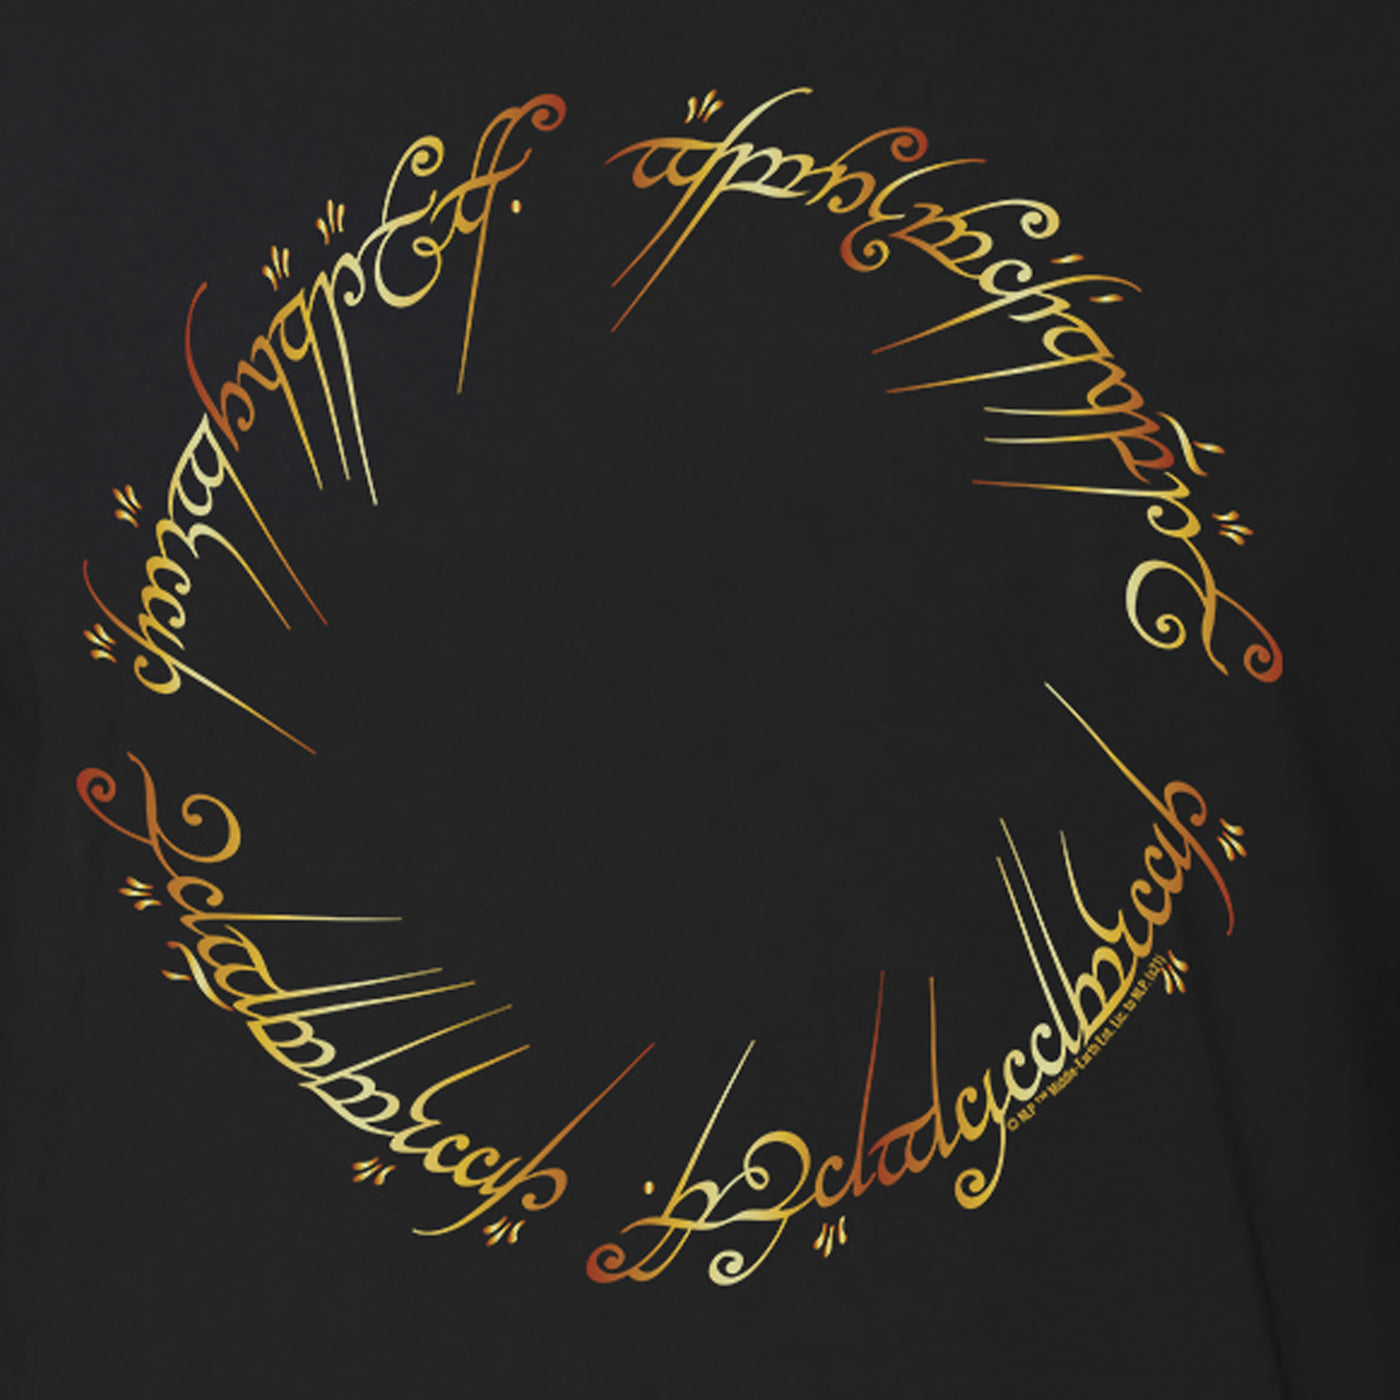 Lord Of The Rings The One Ring Adult Short Sleeve T-Shirt